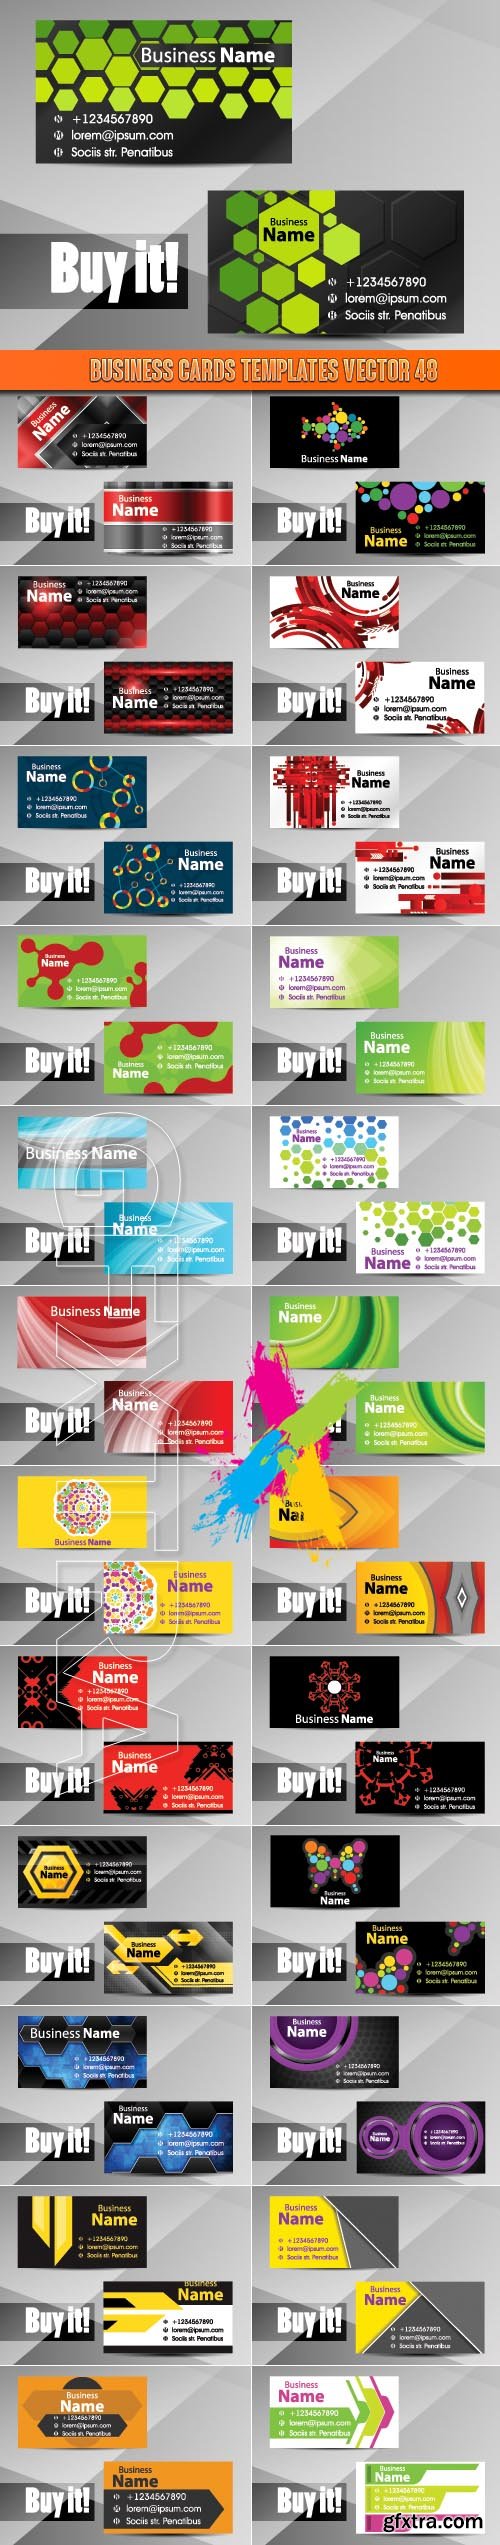 Business Cards Templates vector 48